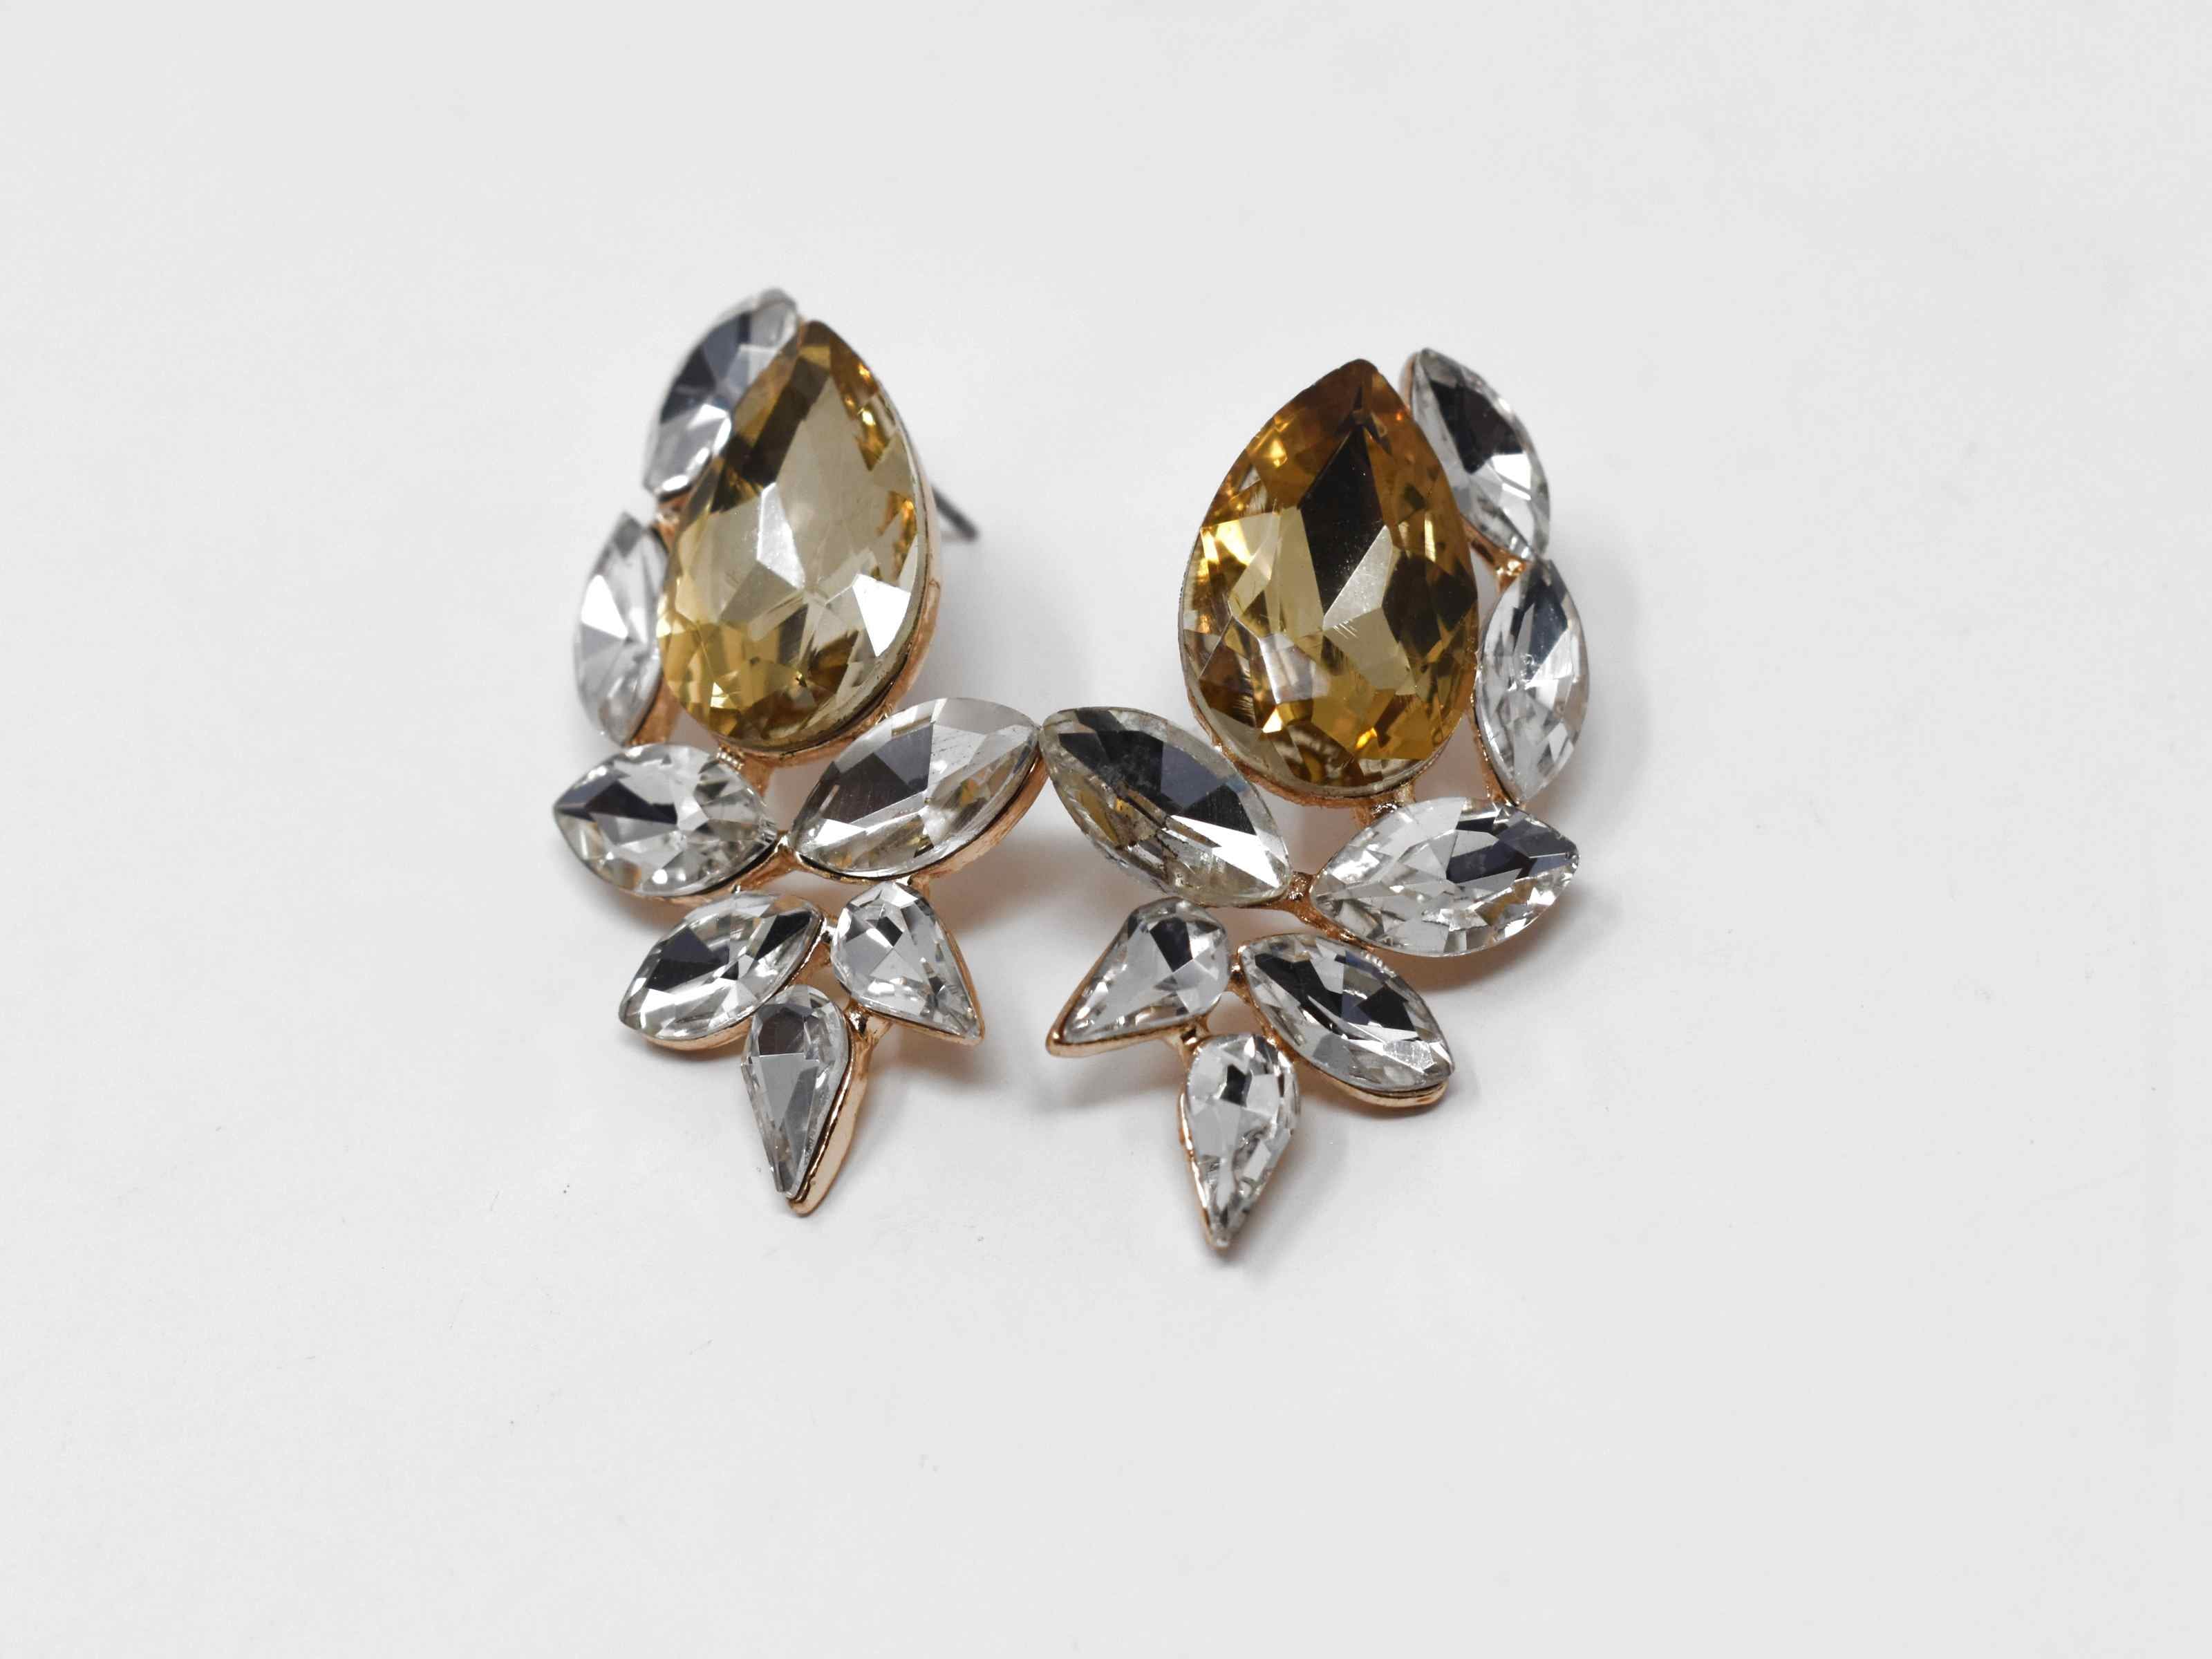 Time to Boss up with our Freesia Knob earrings. These earrings are a gold tone with gold and clear clusters of stones. They are 1 1/2 in length with a push back clasp.